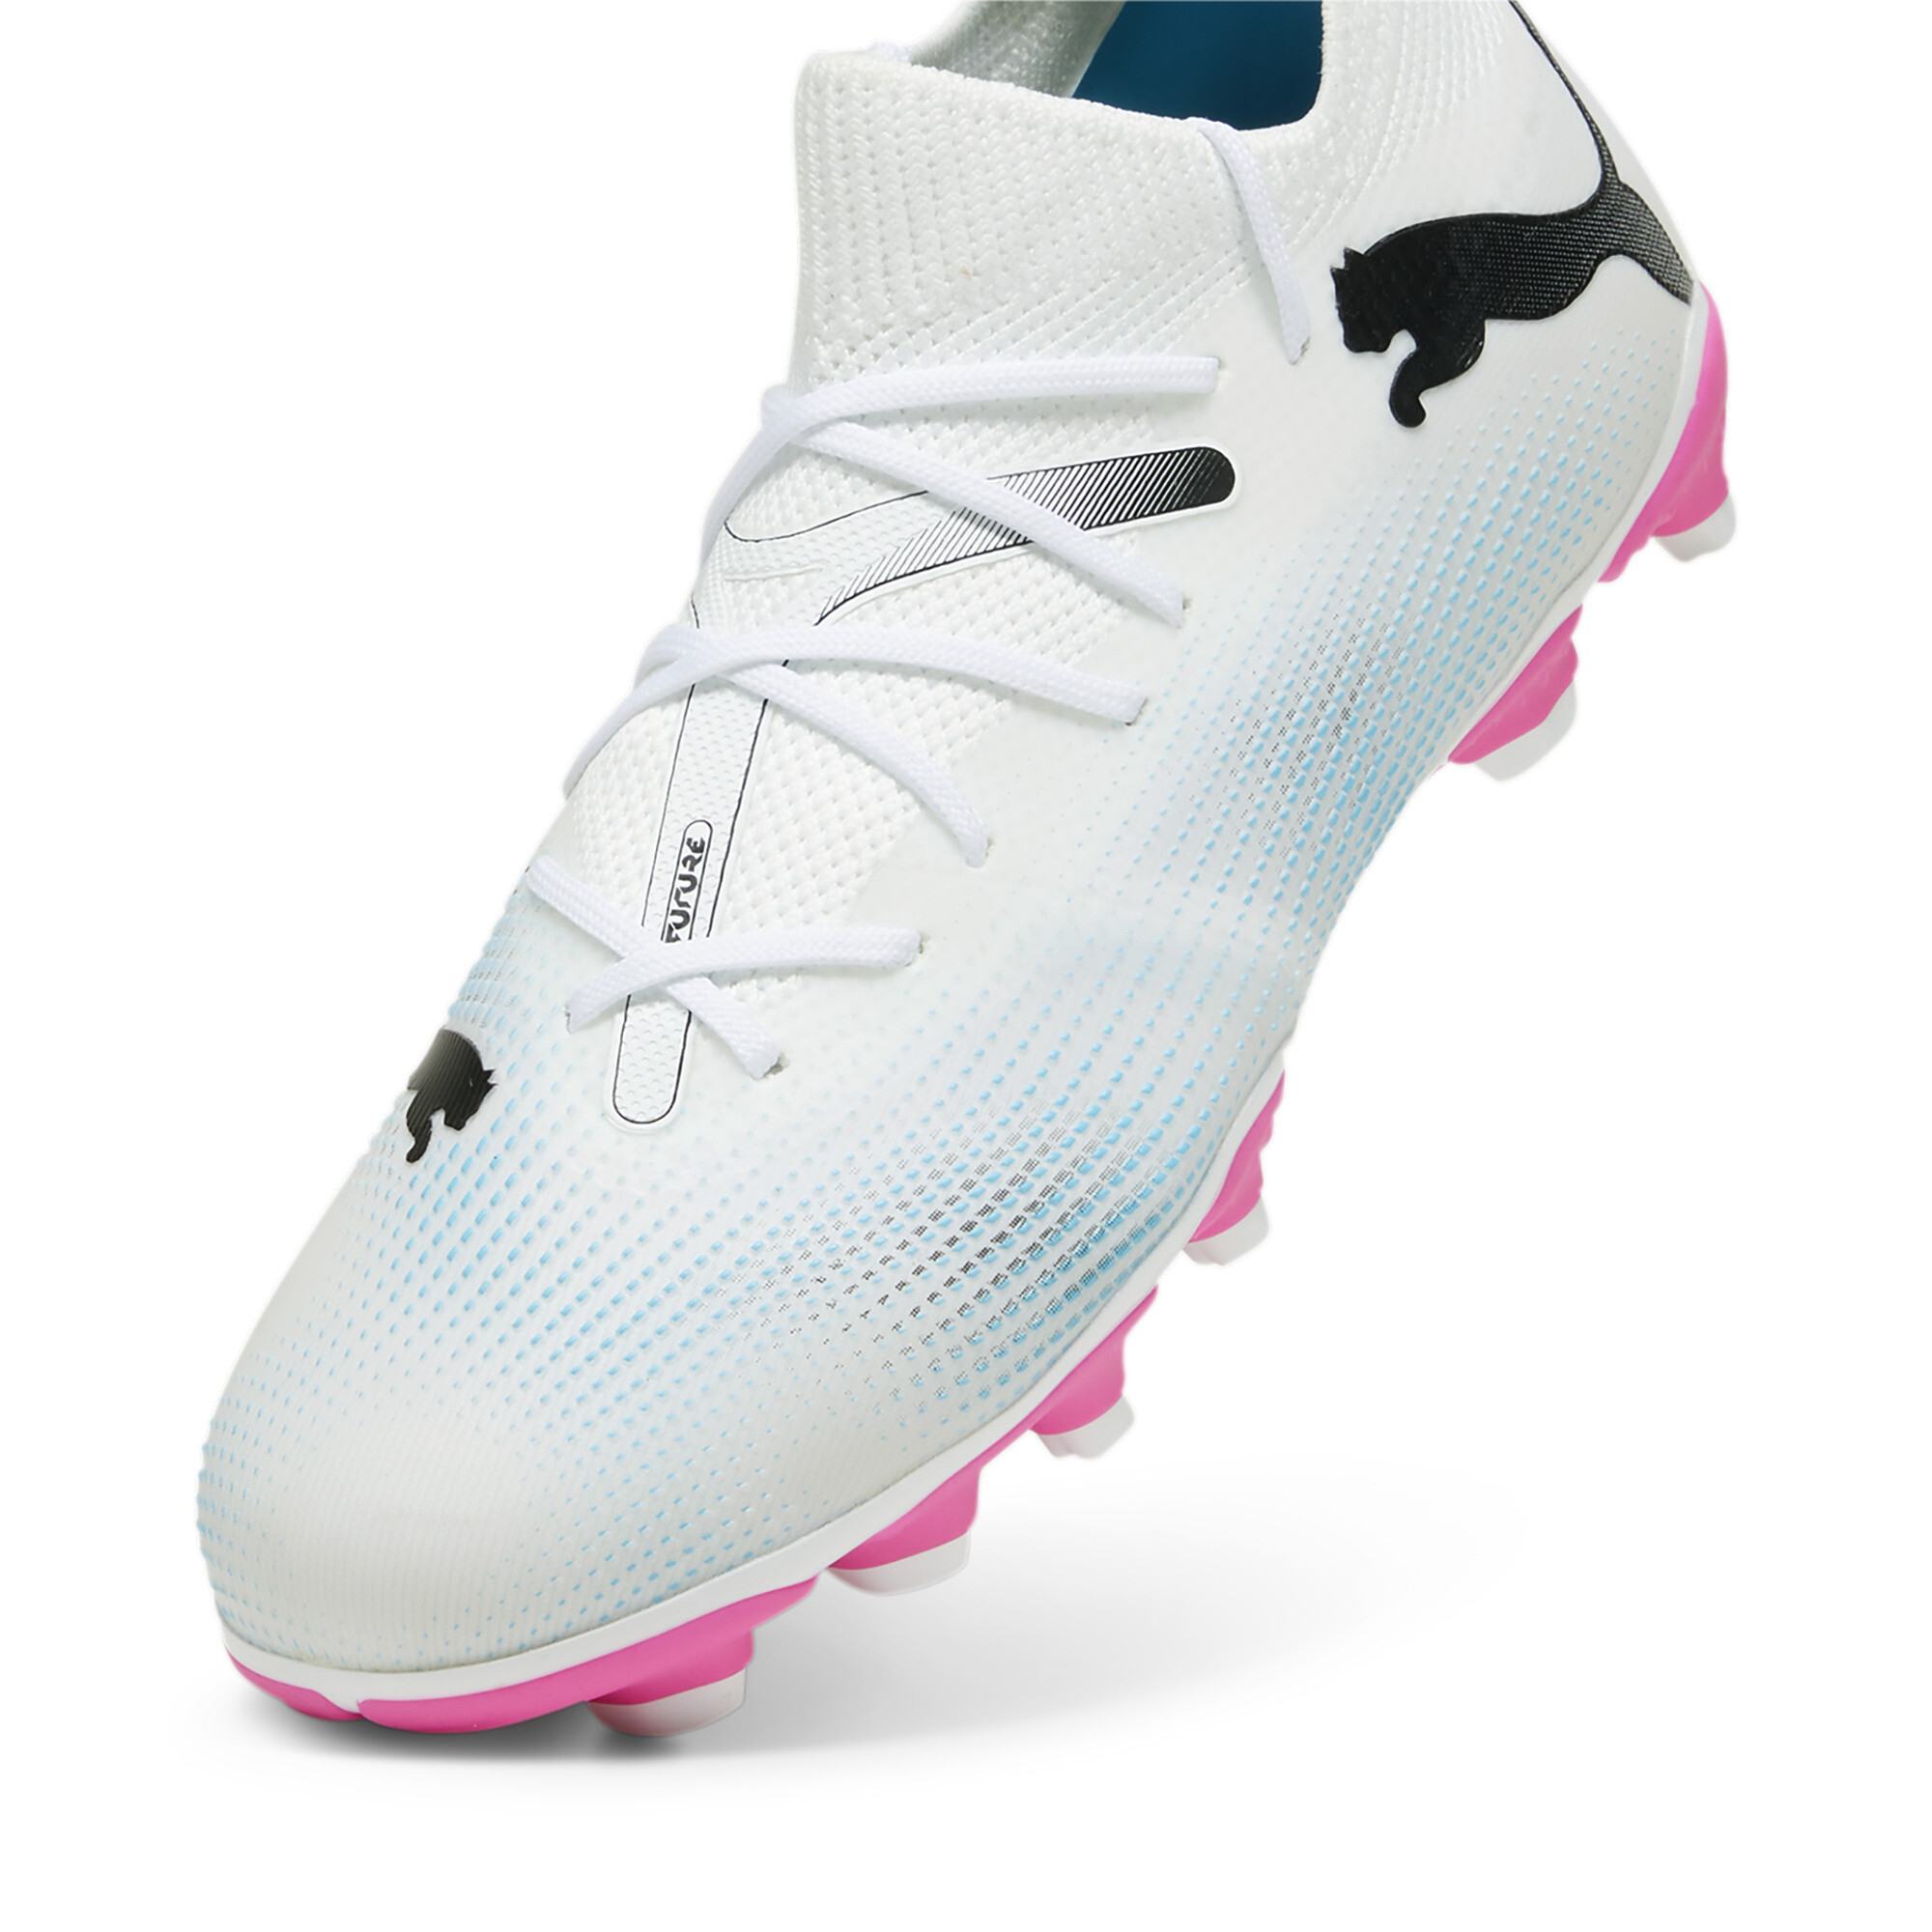 PUMA FUTURE 7 MATCH FG/AG Youth Football Boots In White/Pink, Size EU 29